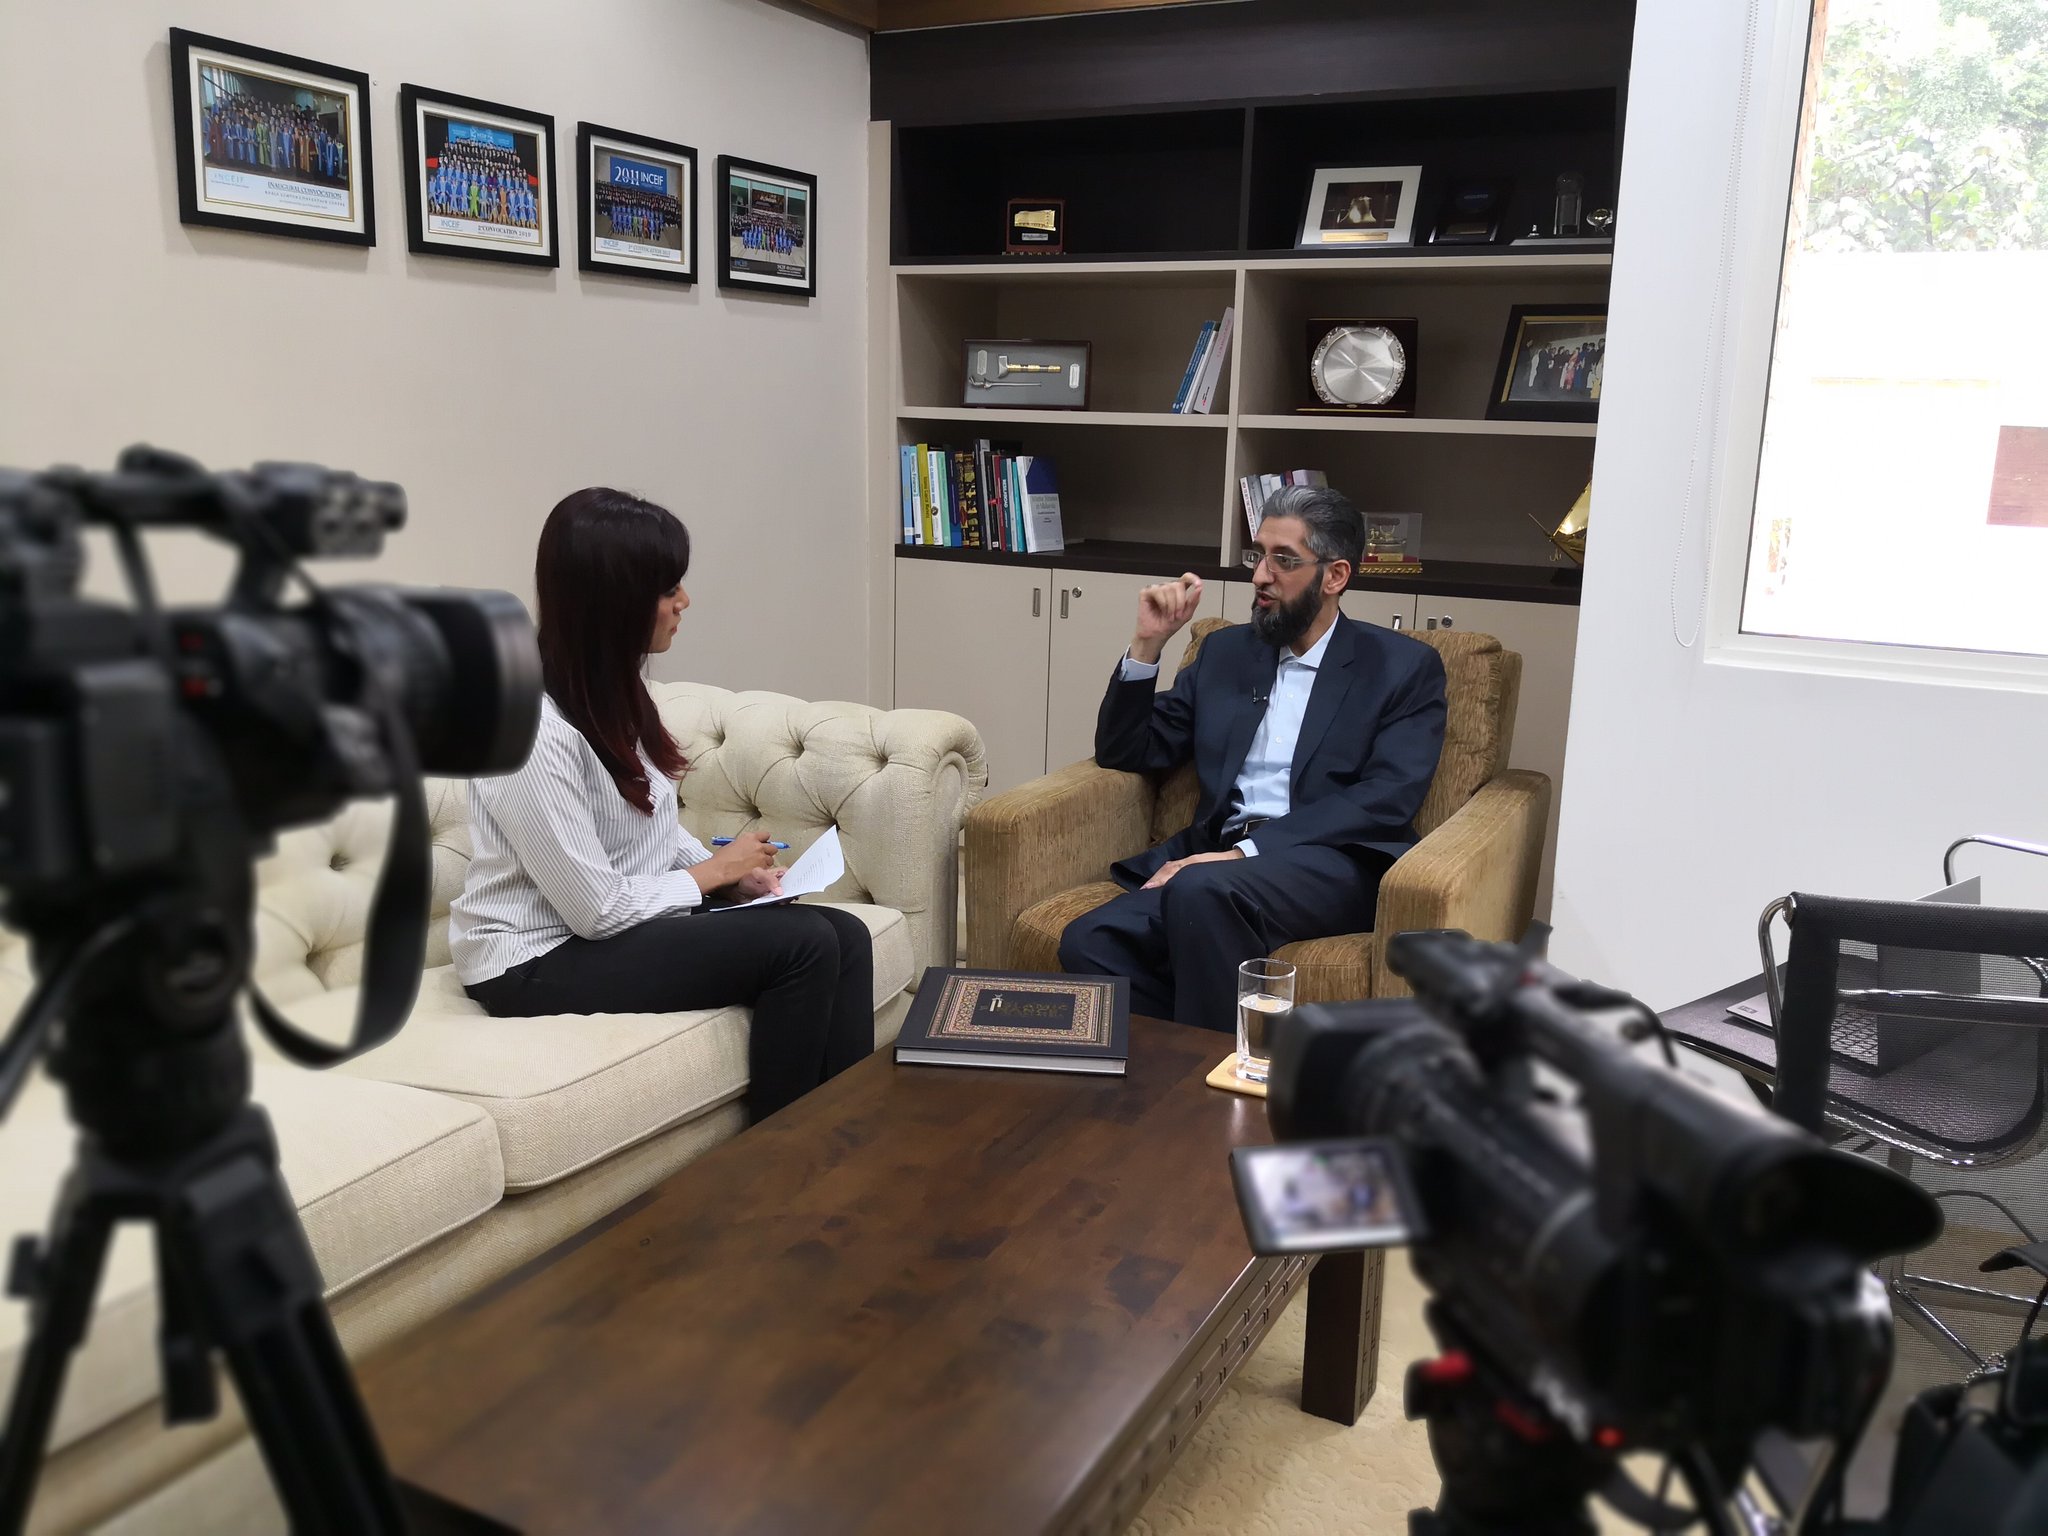 INCEIF, The Global University of Islamic Finance on Twitter: "We are excited to have Our Subject Matter Expert Cryptocurrency/ Bitcoin Asst. Prof Dr Ziyaad Mahomed breaks down the intricacies behind cryptocurrencies which will be aired on TV3 soon ...